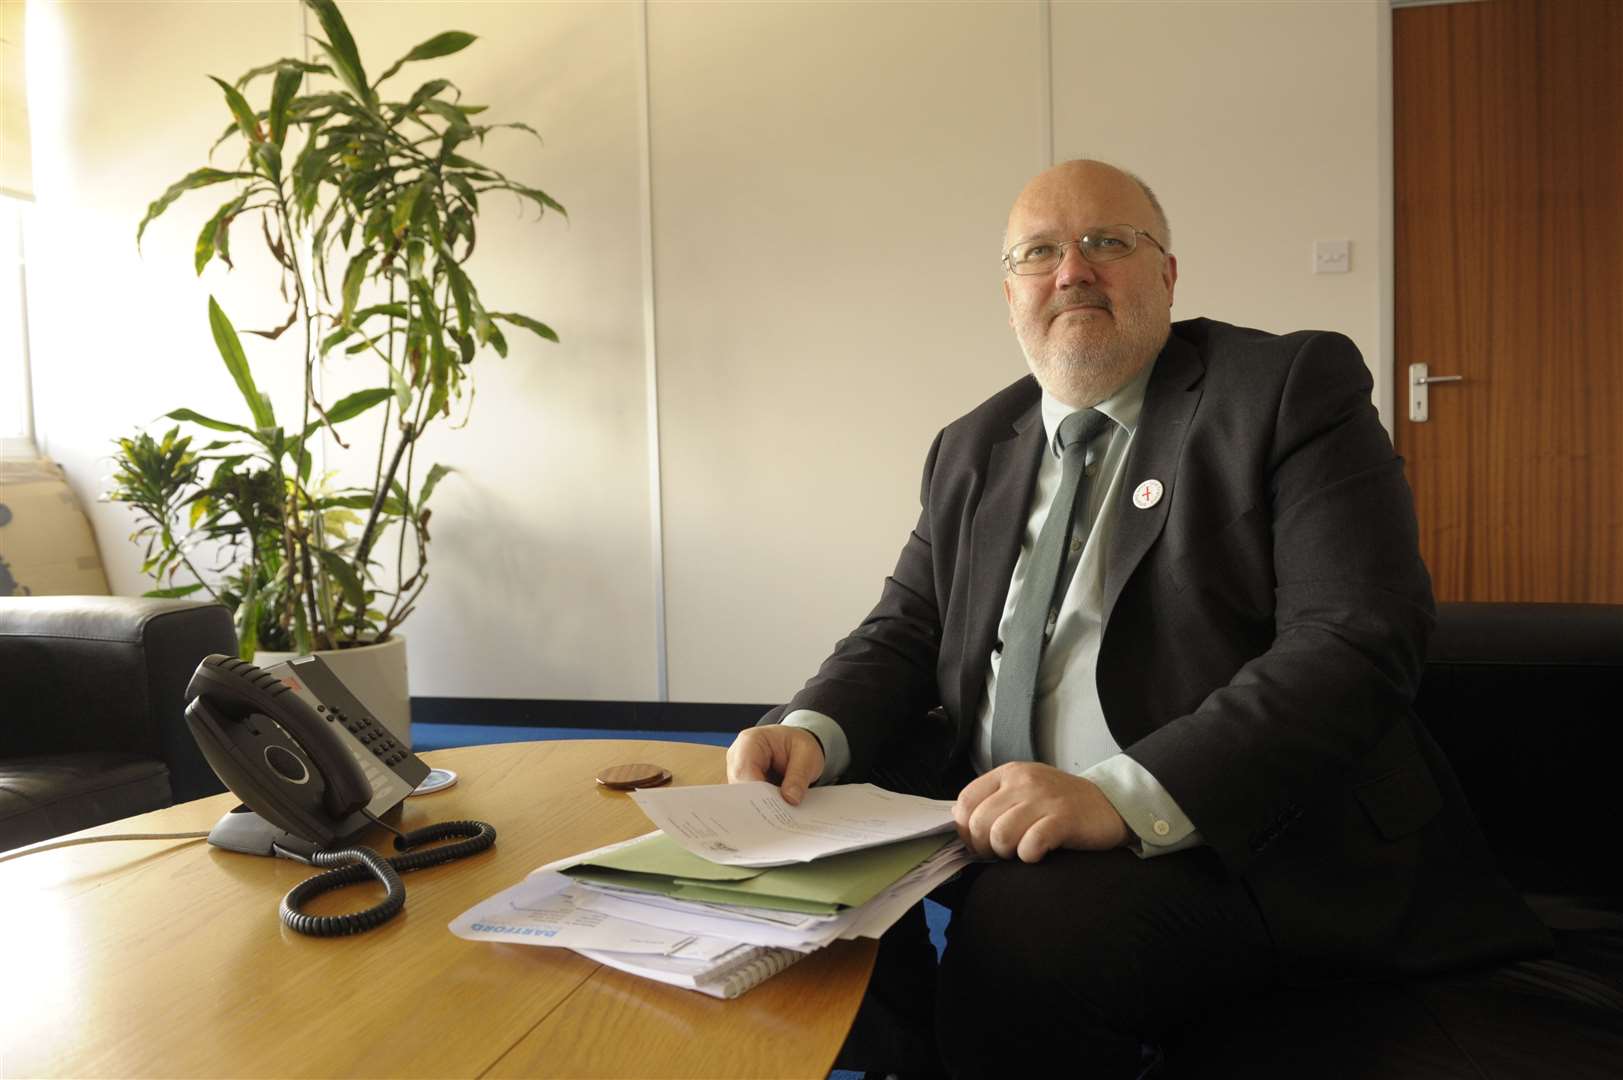 Council life has been turned on its head as it conducts most meetings via Zoom Picture: Steve Crispe